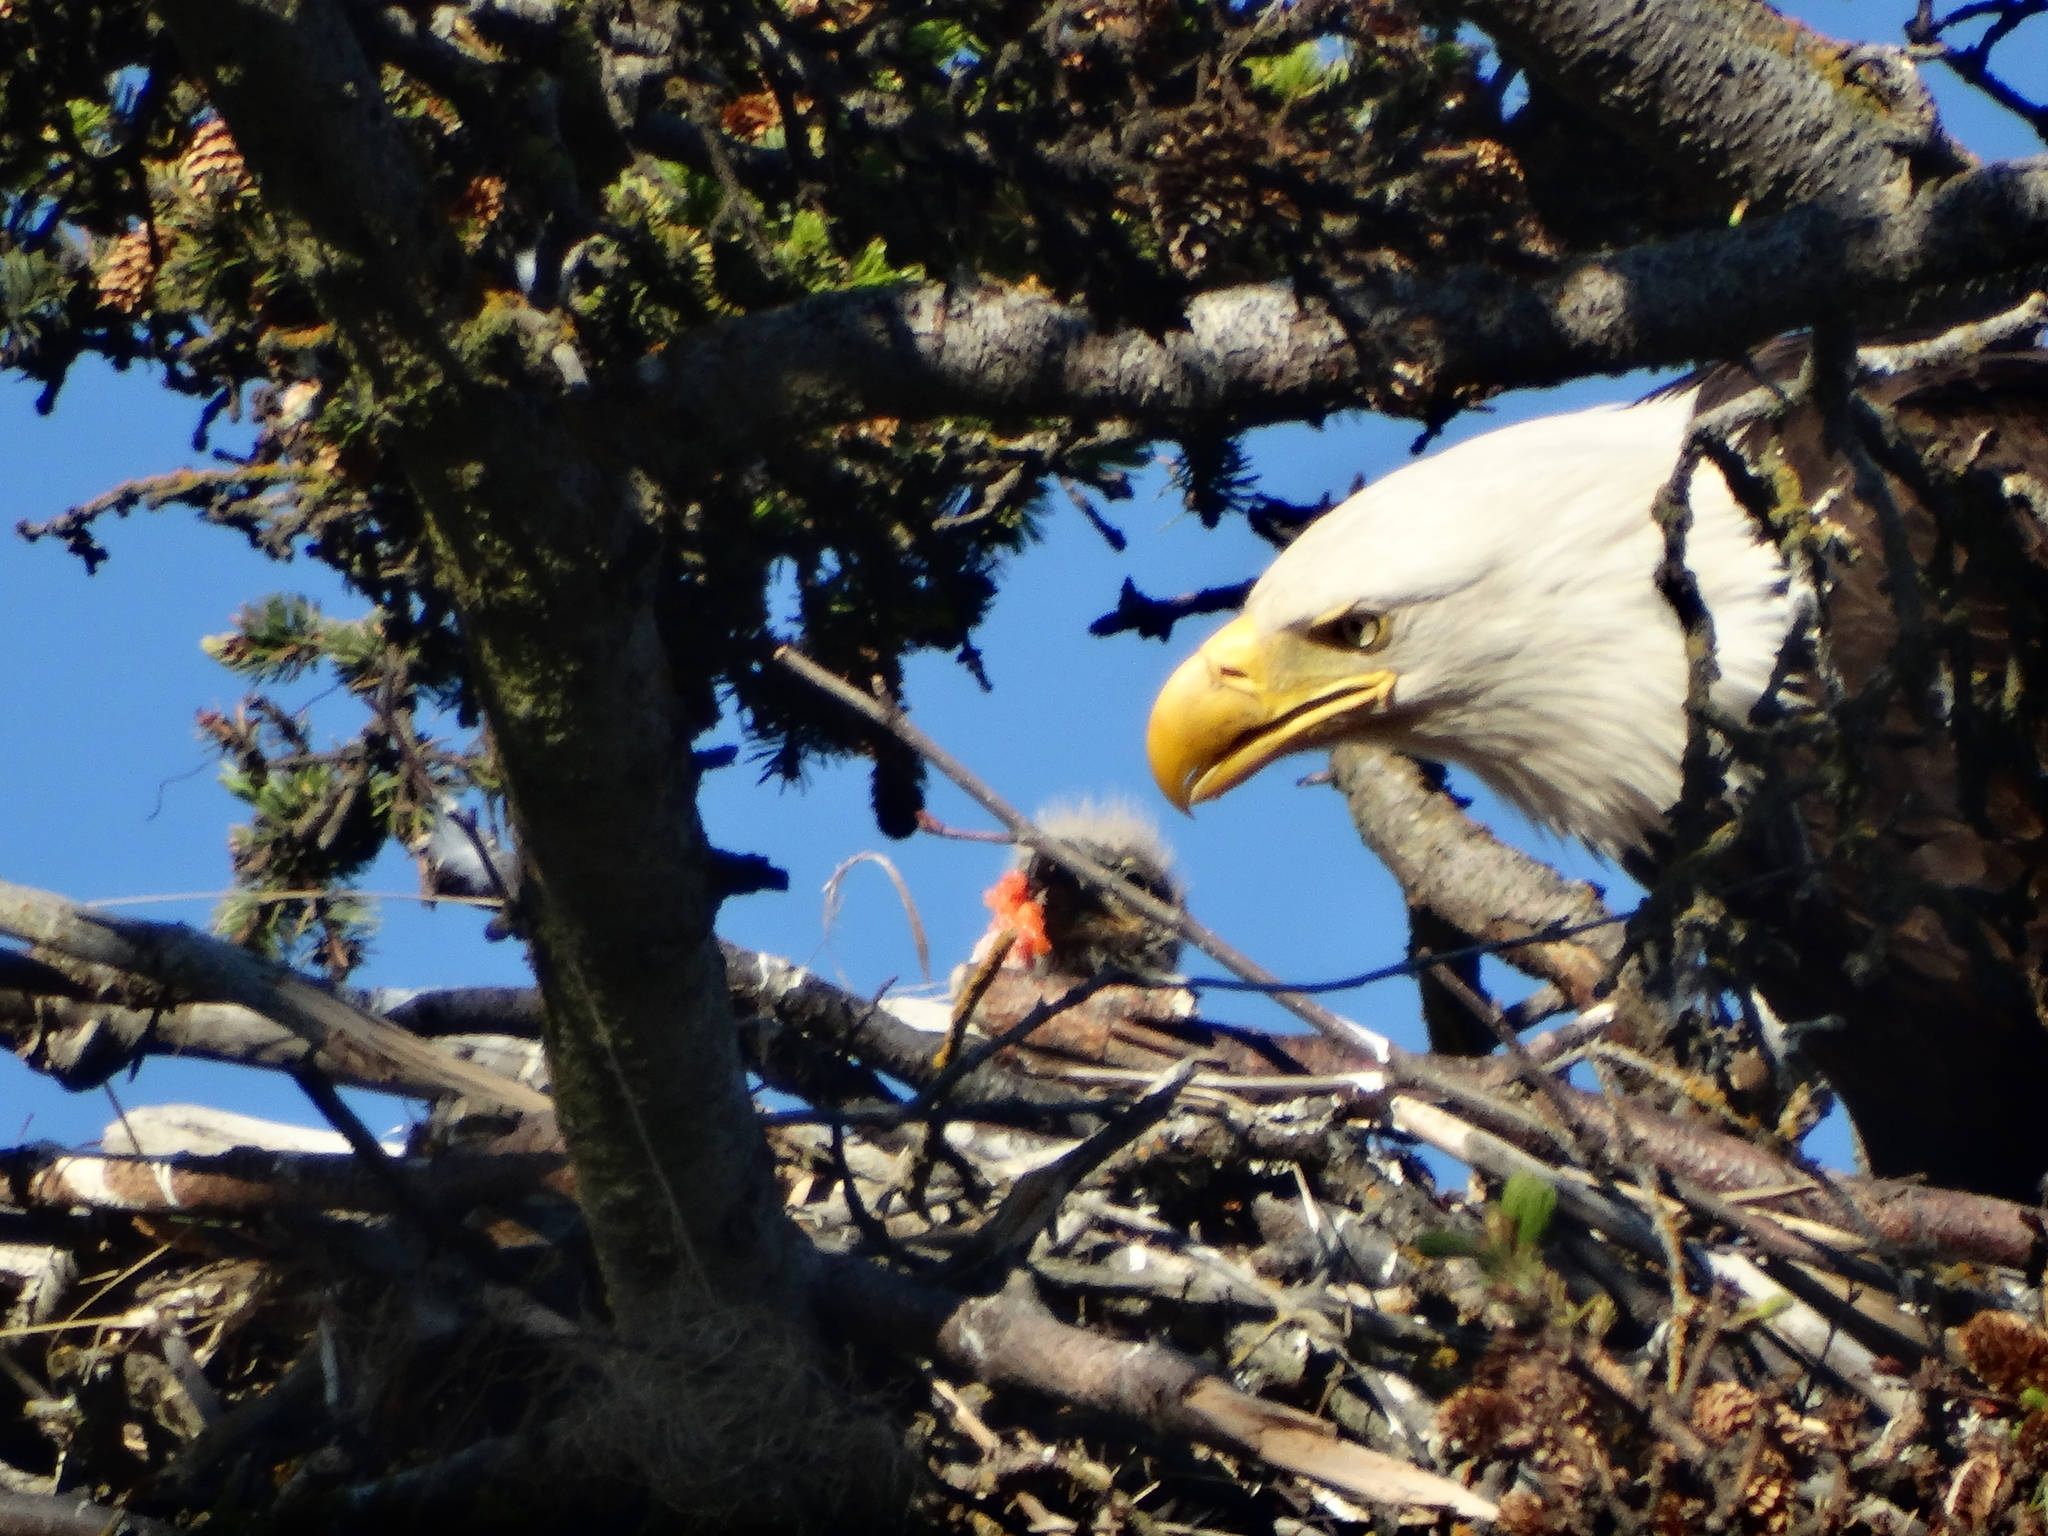 A bald eagle feeds its chick on the evening of June. 24, 2017, at the nest across from the Homer Post Office on the Sterling Highway. Since 2010, a pair of bald eagles has nested in the area near Beluga Slough south of the Lake Street and Sterling Highway intersection. The first nest was destroyed when the tree fell down in a winter storm. In 2012 the eagles built a new nest across from the Homer Post Office by the motorhome dump station. In 2014 they built another nest in a new tree closer to the slough. This yearճ nest is a new one, just east of the 2014-2015 nest.